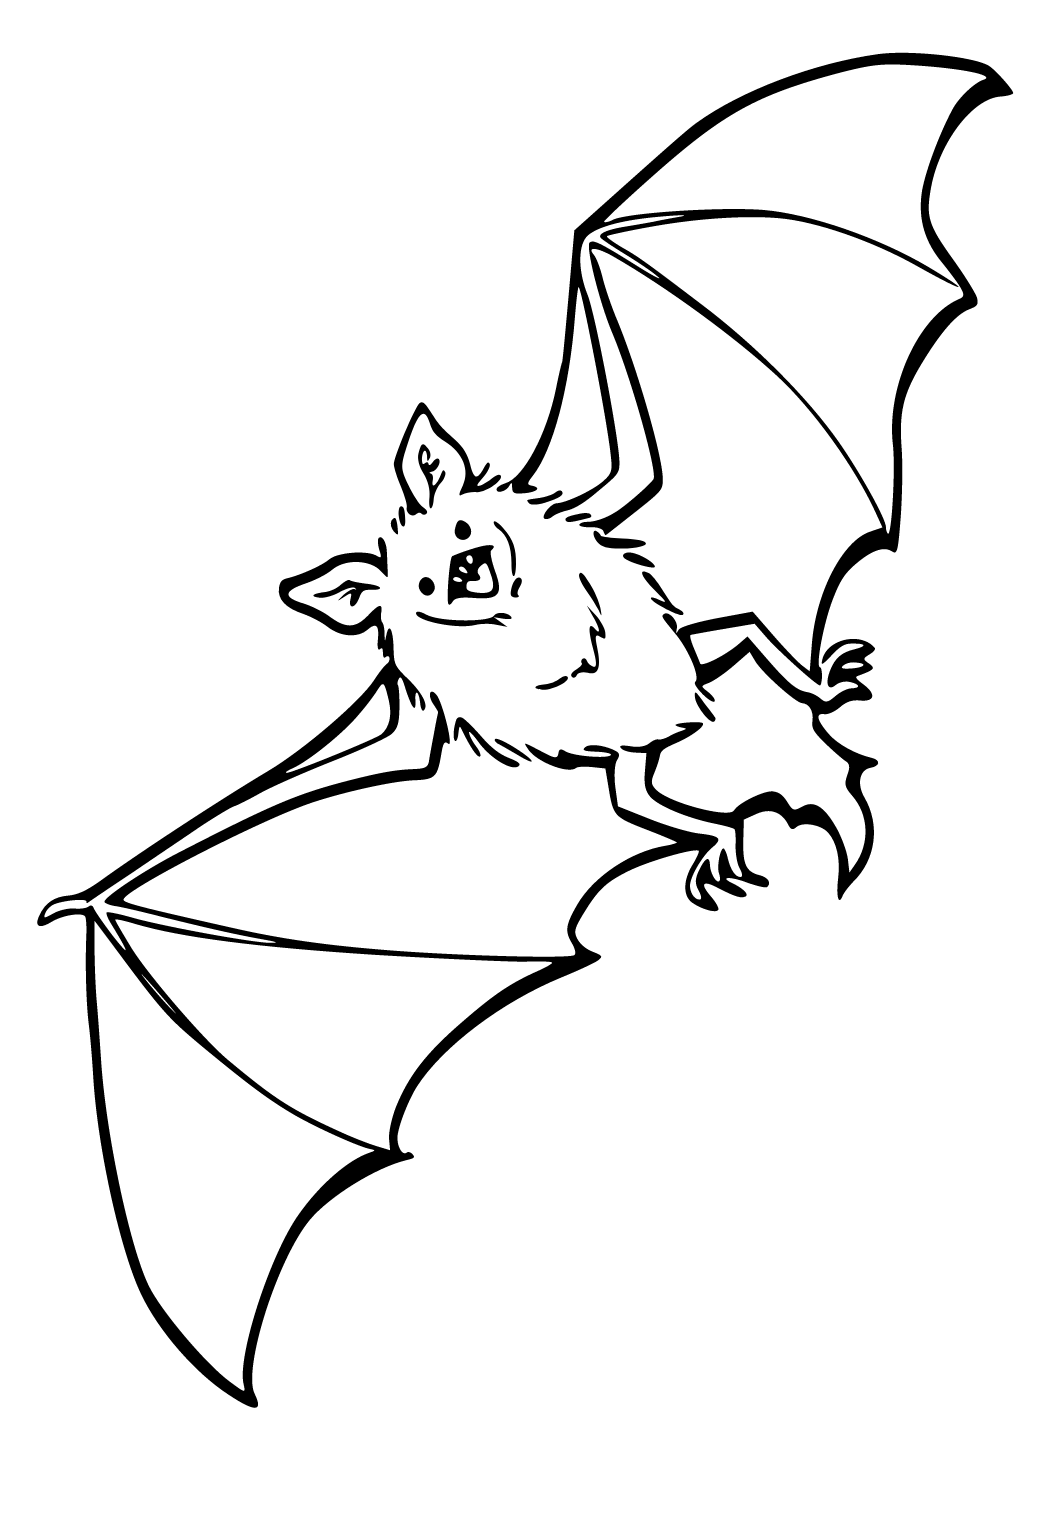 Free printable bat real coloring page for adults and kids